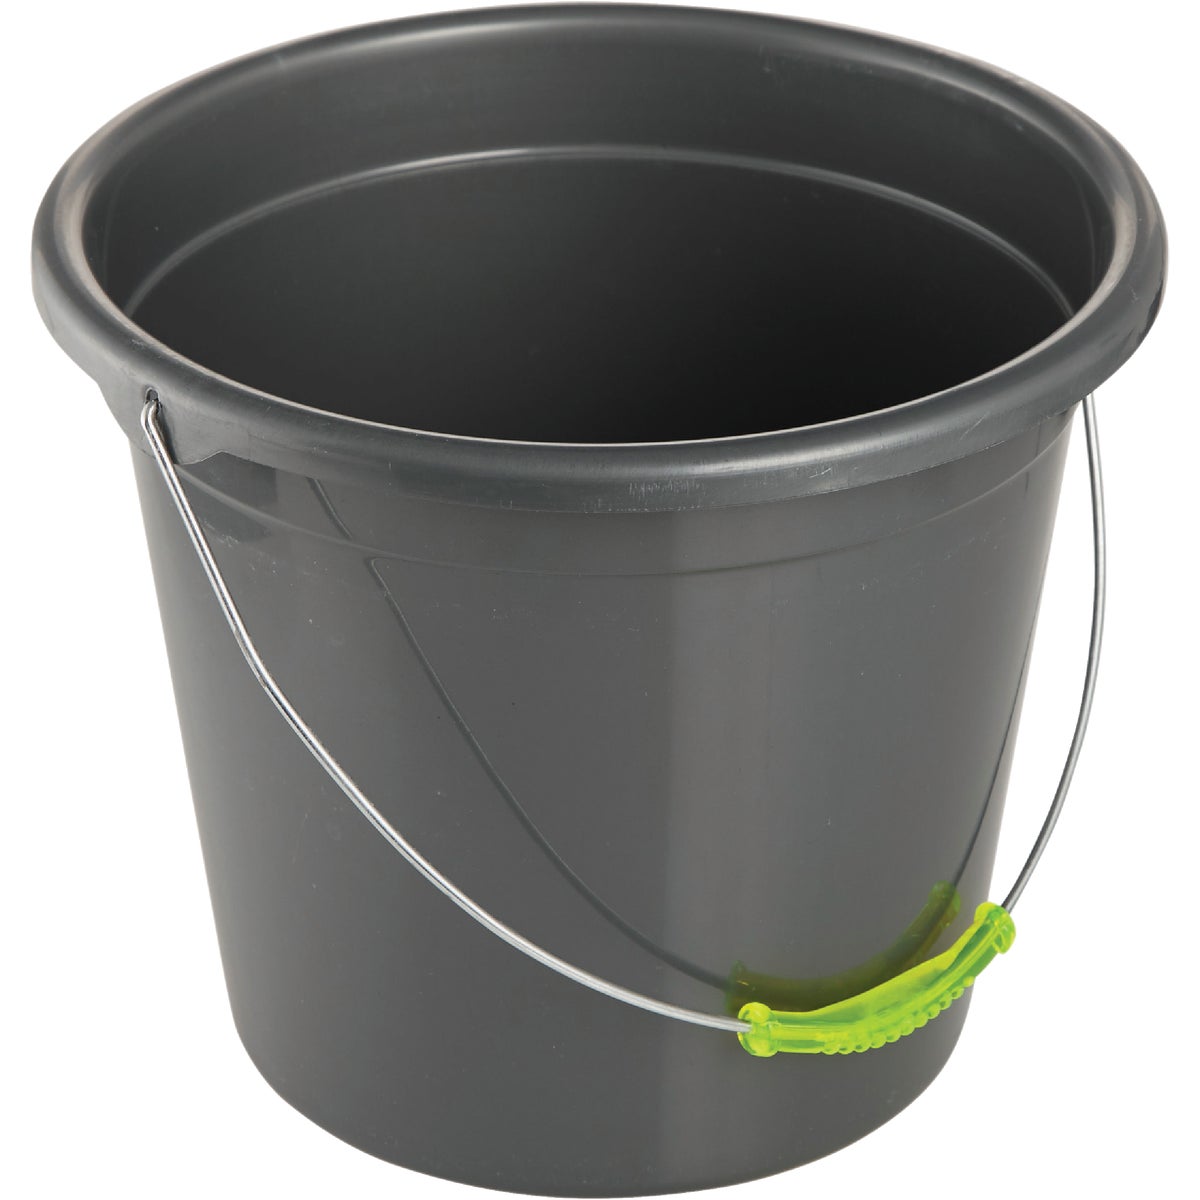 Item 607118, Smart Savers poly bucket. Features a durable carry handle. Color: Black.